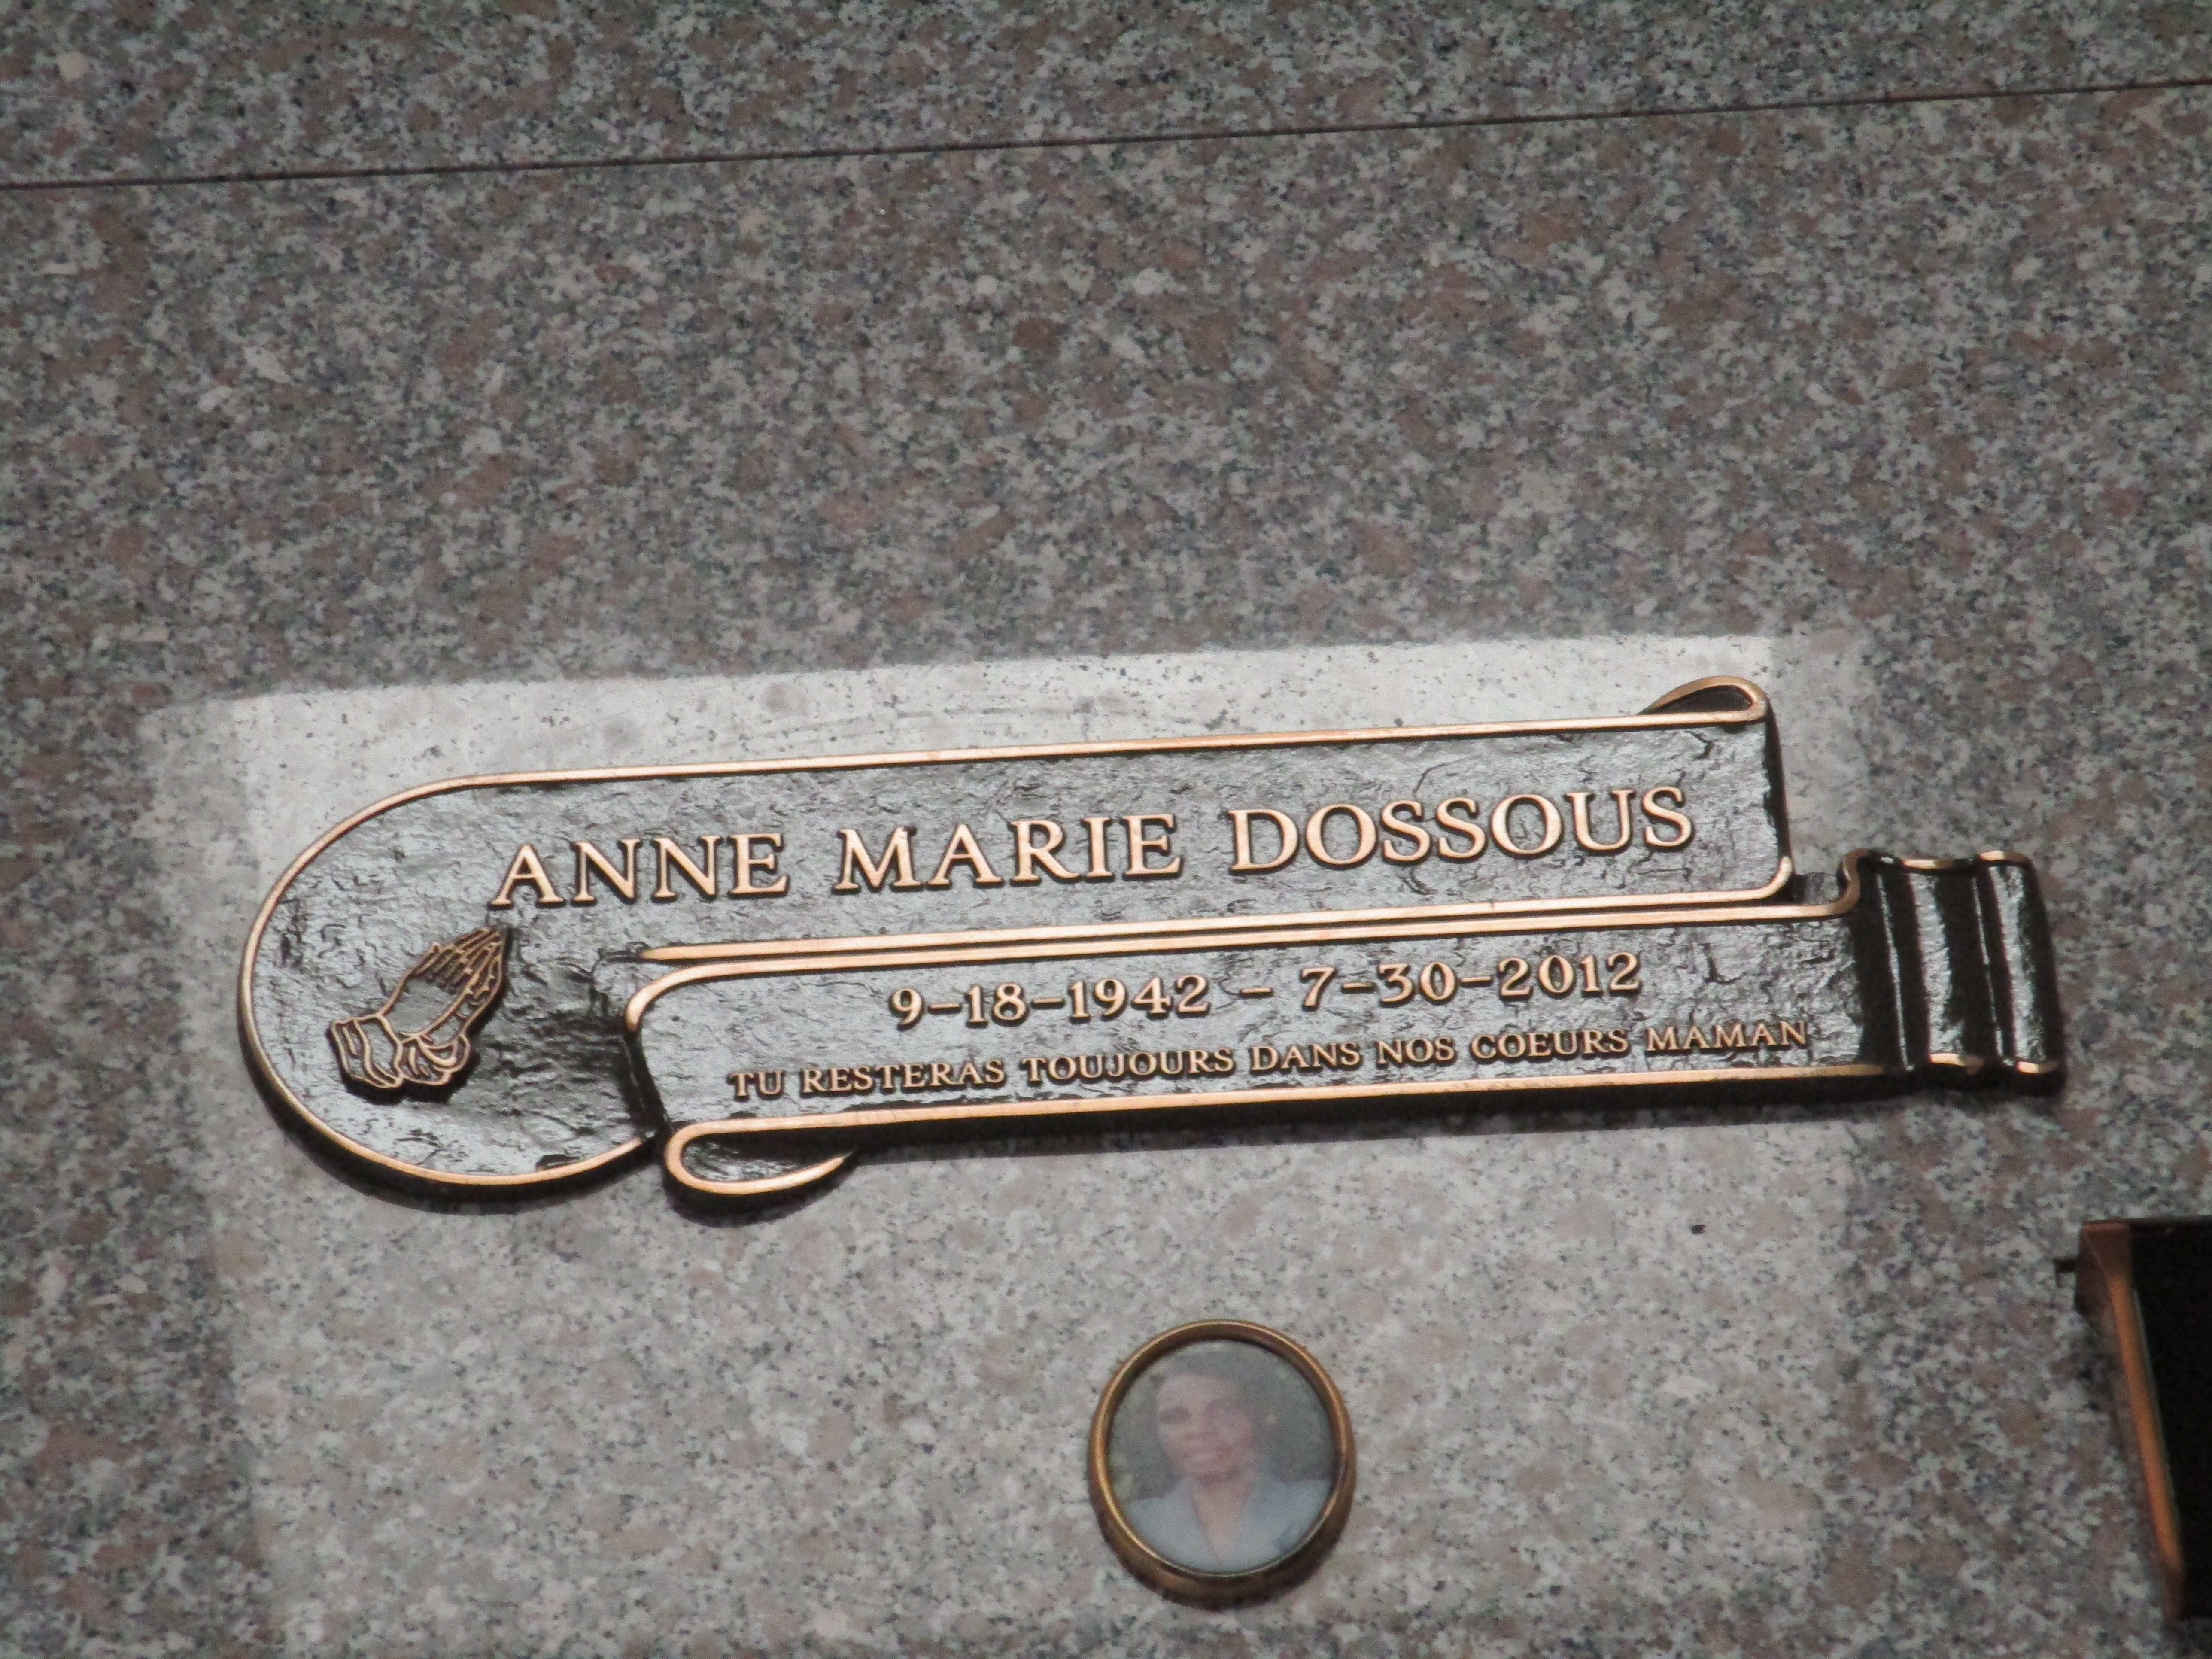 Anne Marie Dossous